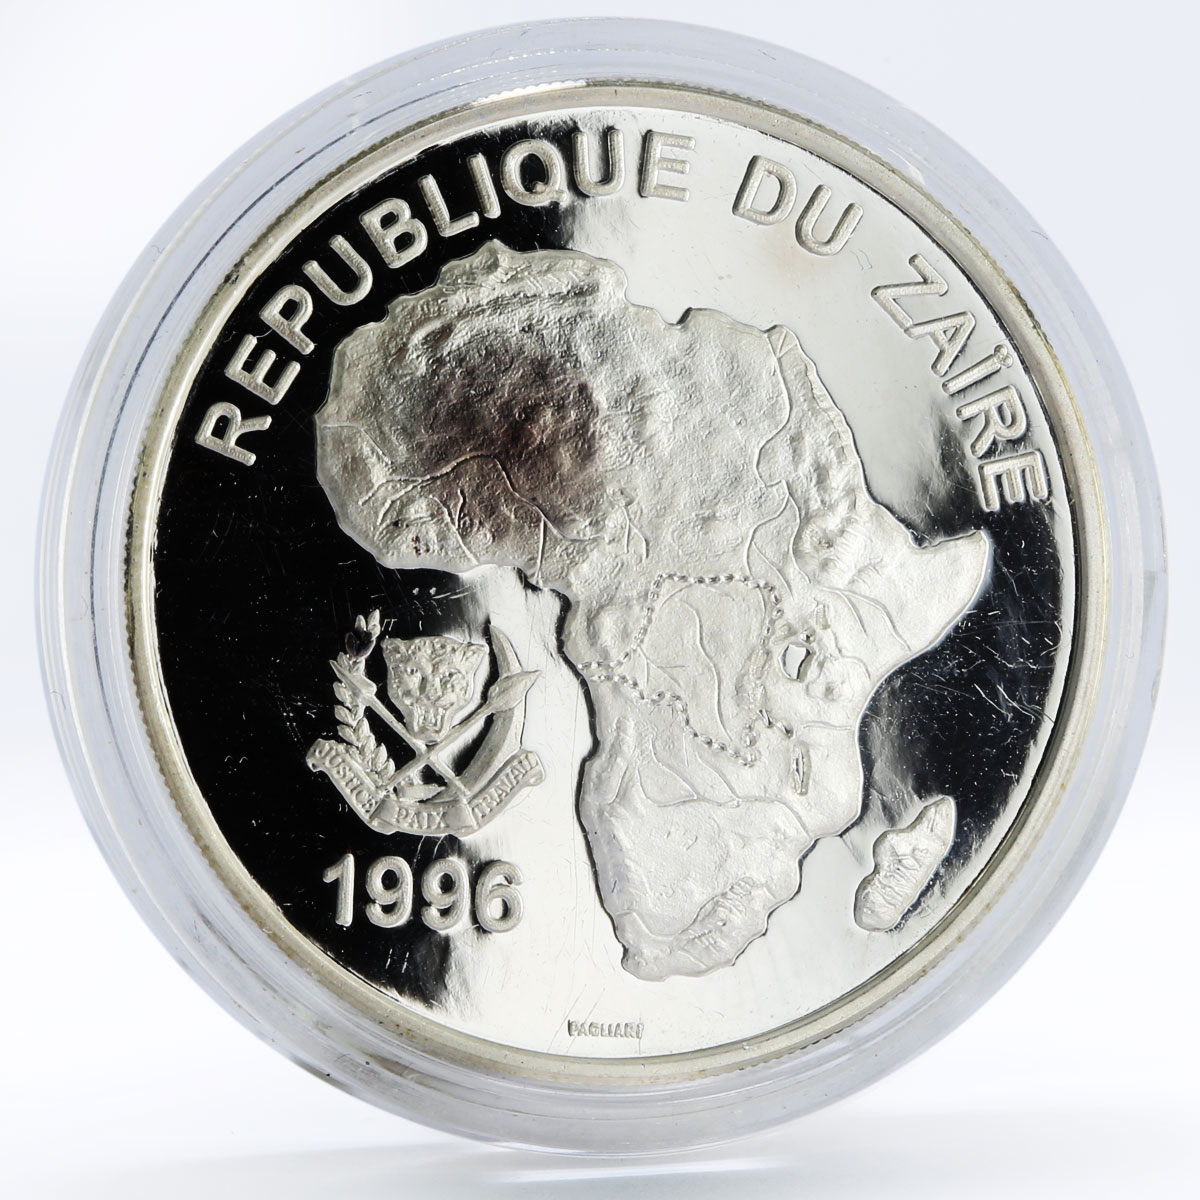 Zaire 500 francs African Wildlife Fauna Gorilla proof silver coin 1996